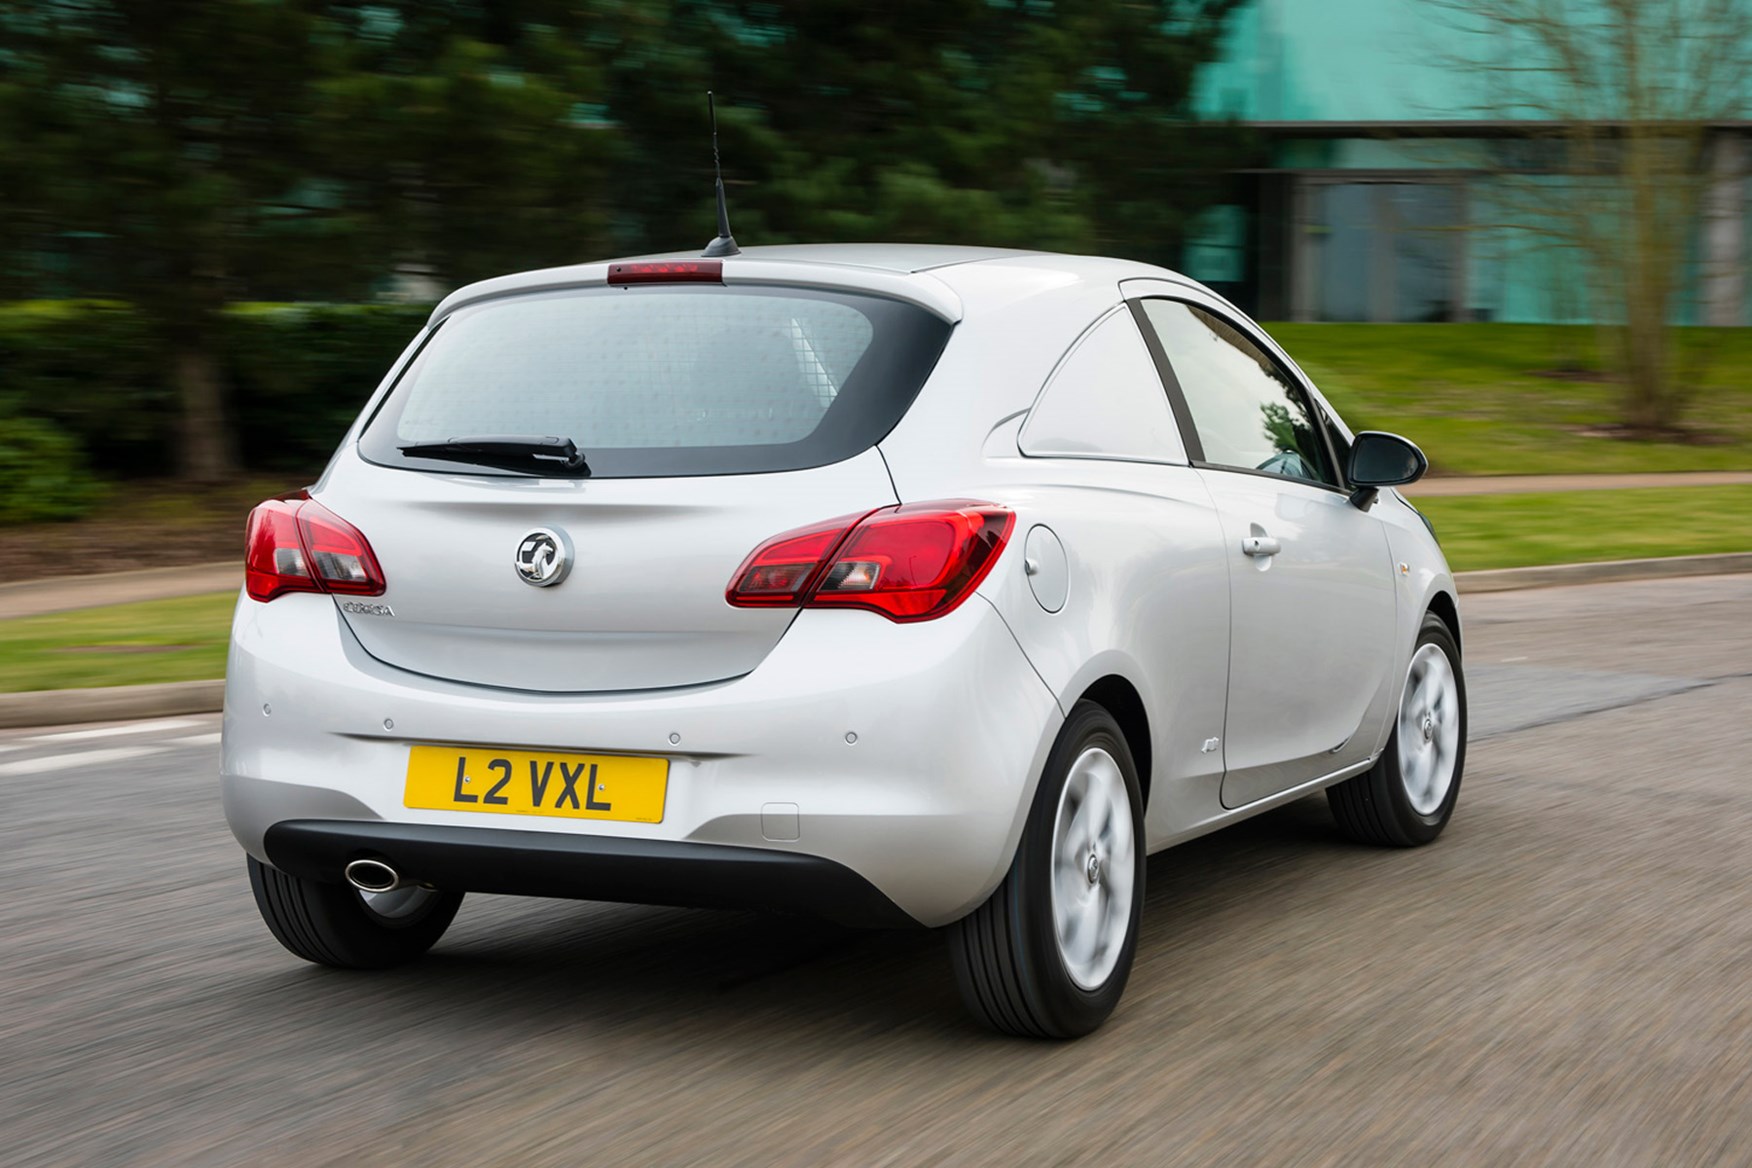 Vauxhall Corsa full review on Parkers Vans - load area